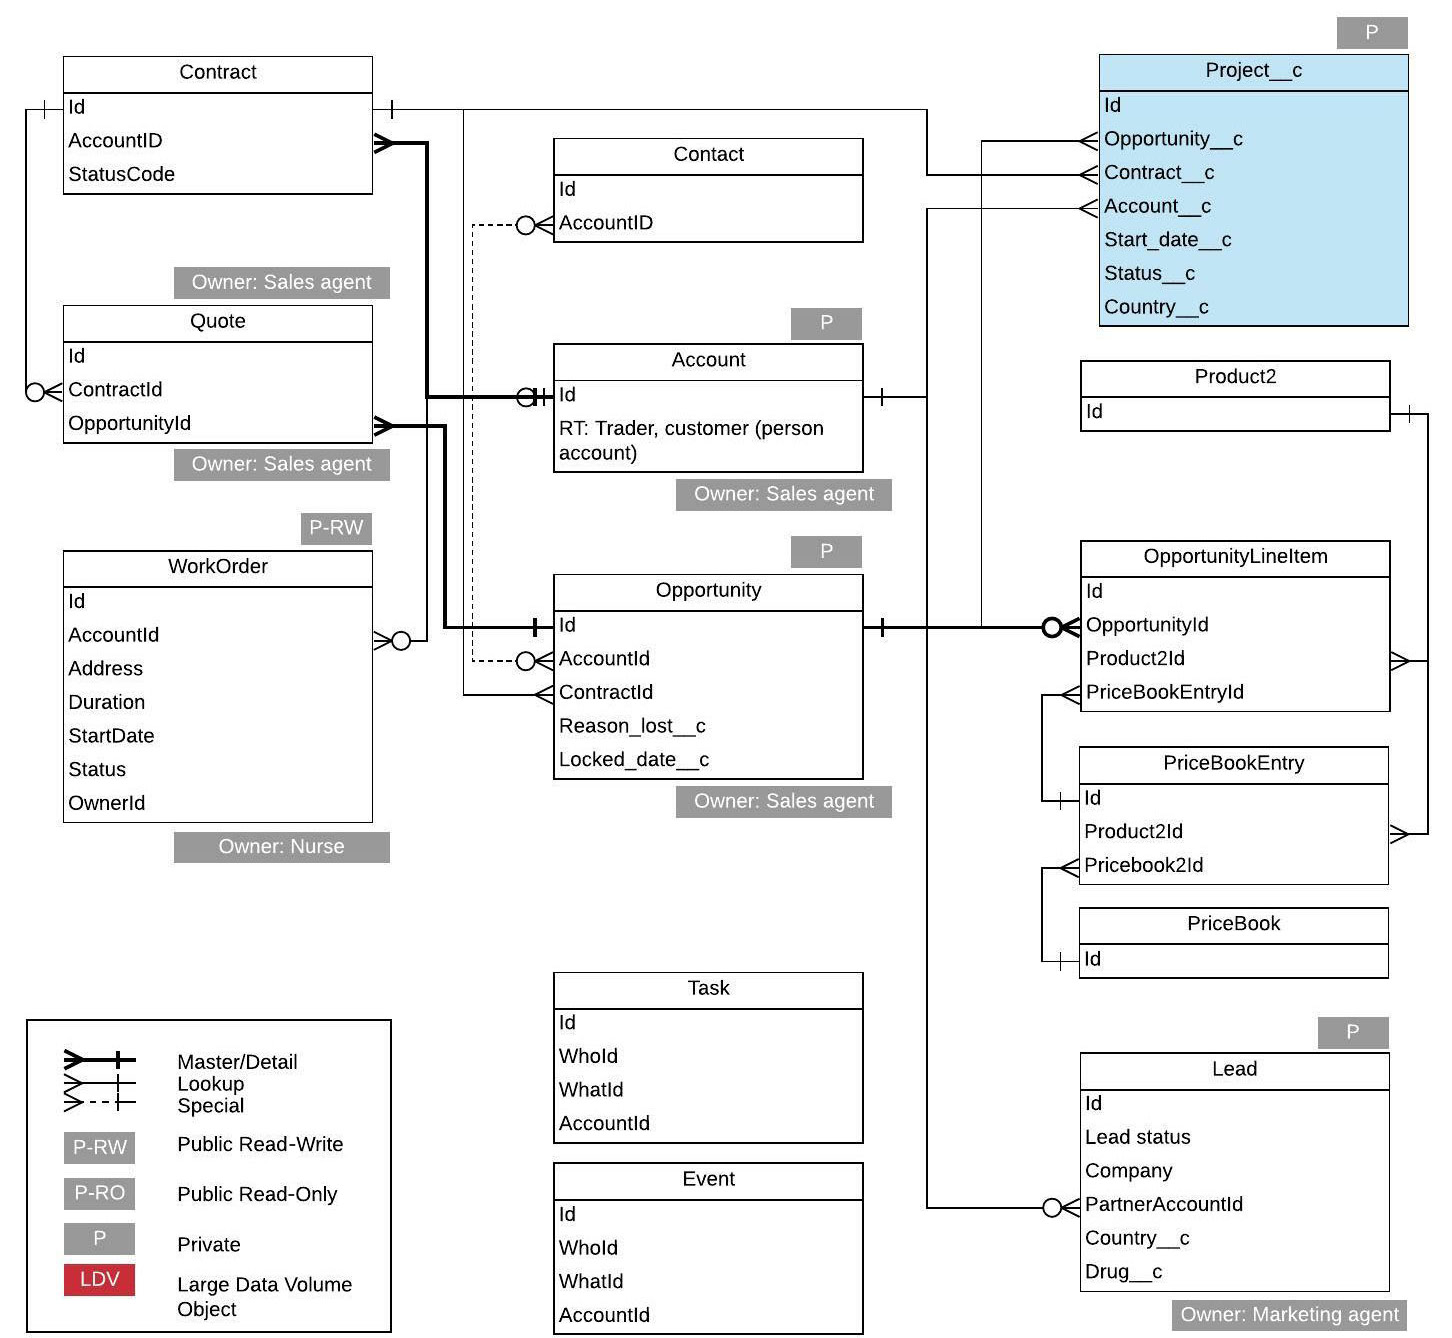 This is the second draft of the data model diagram. It has interconnected boxes labeled “Contract’, ‘Contact’, ‘Project_c’, ‘Quote’, ‘Account’, ‘Product2’, ‘WorkOrder’, ‘Opportunity’, ‘OpportunityLineItem’, ‘PriceBookEntry’, ‘PriceBook’, and ‘Lead’. There are two separate boxes at the bottom: ‘Task’ and ‘Event’. 